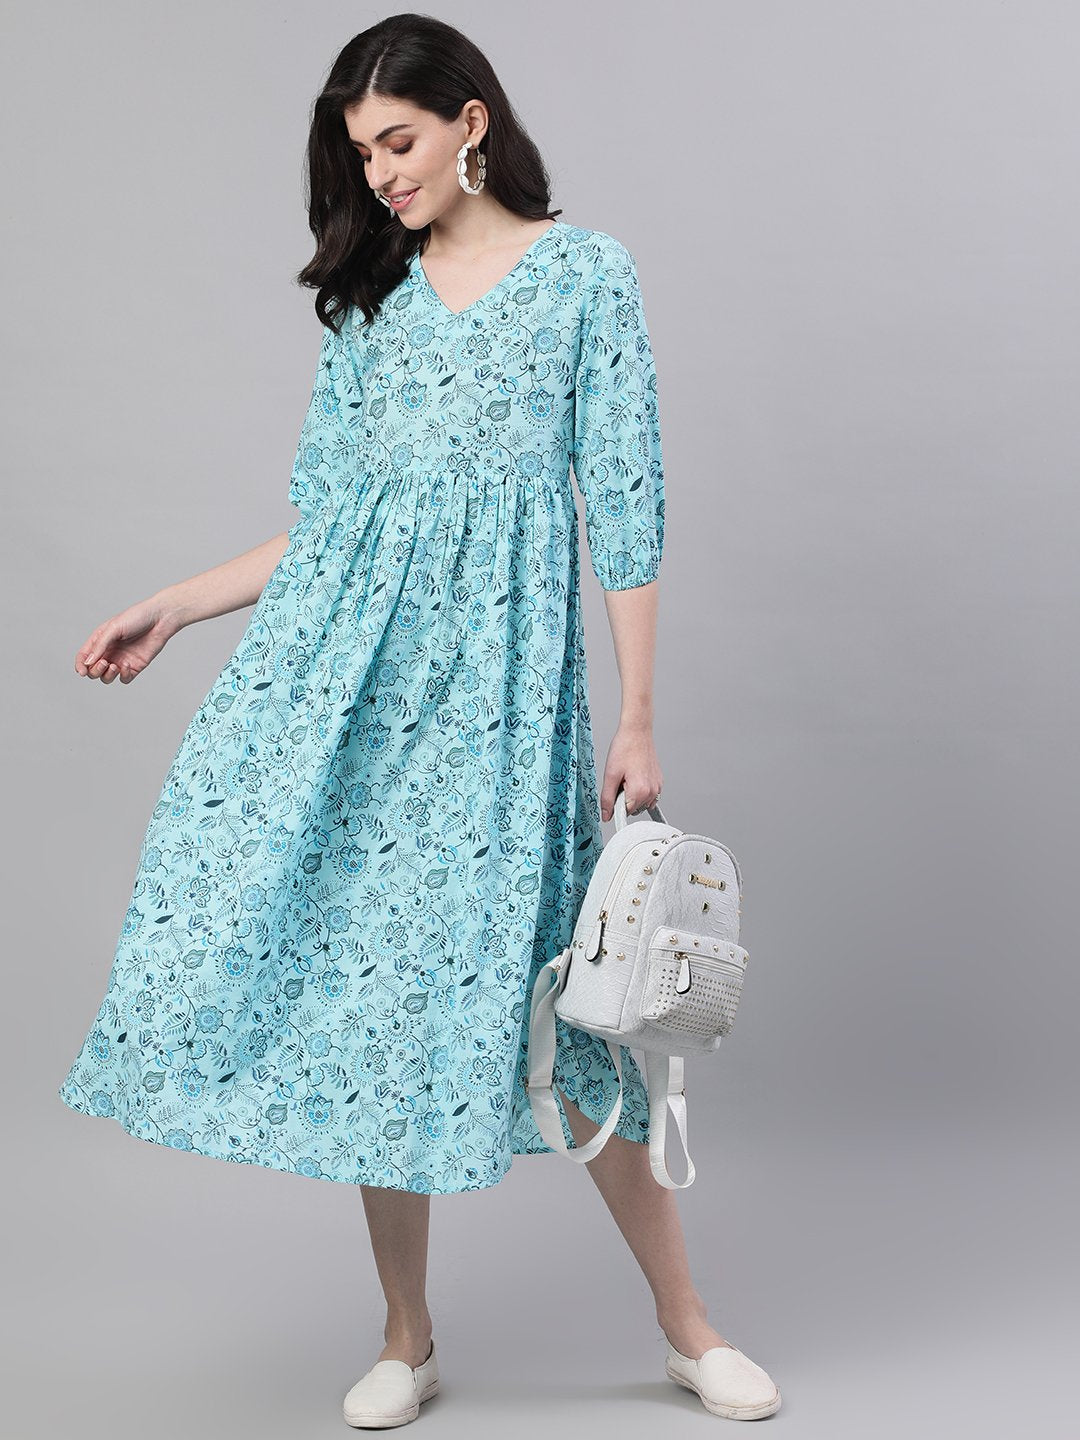 Women's Blue Floral Printed V-Neck Cotton Fit And Flare Dress - Nayo Clothing